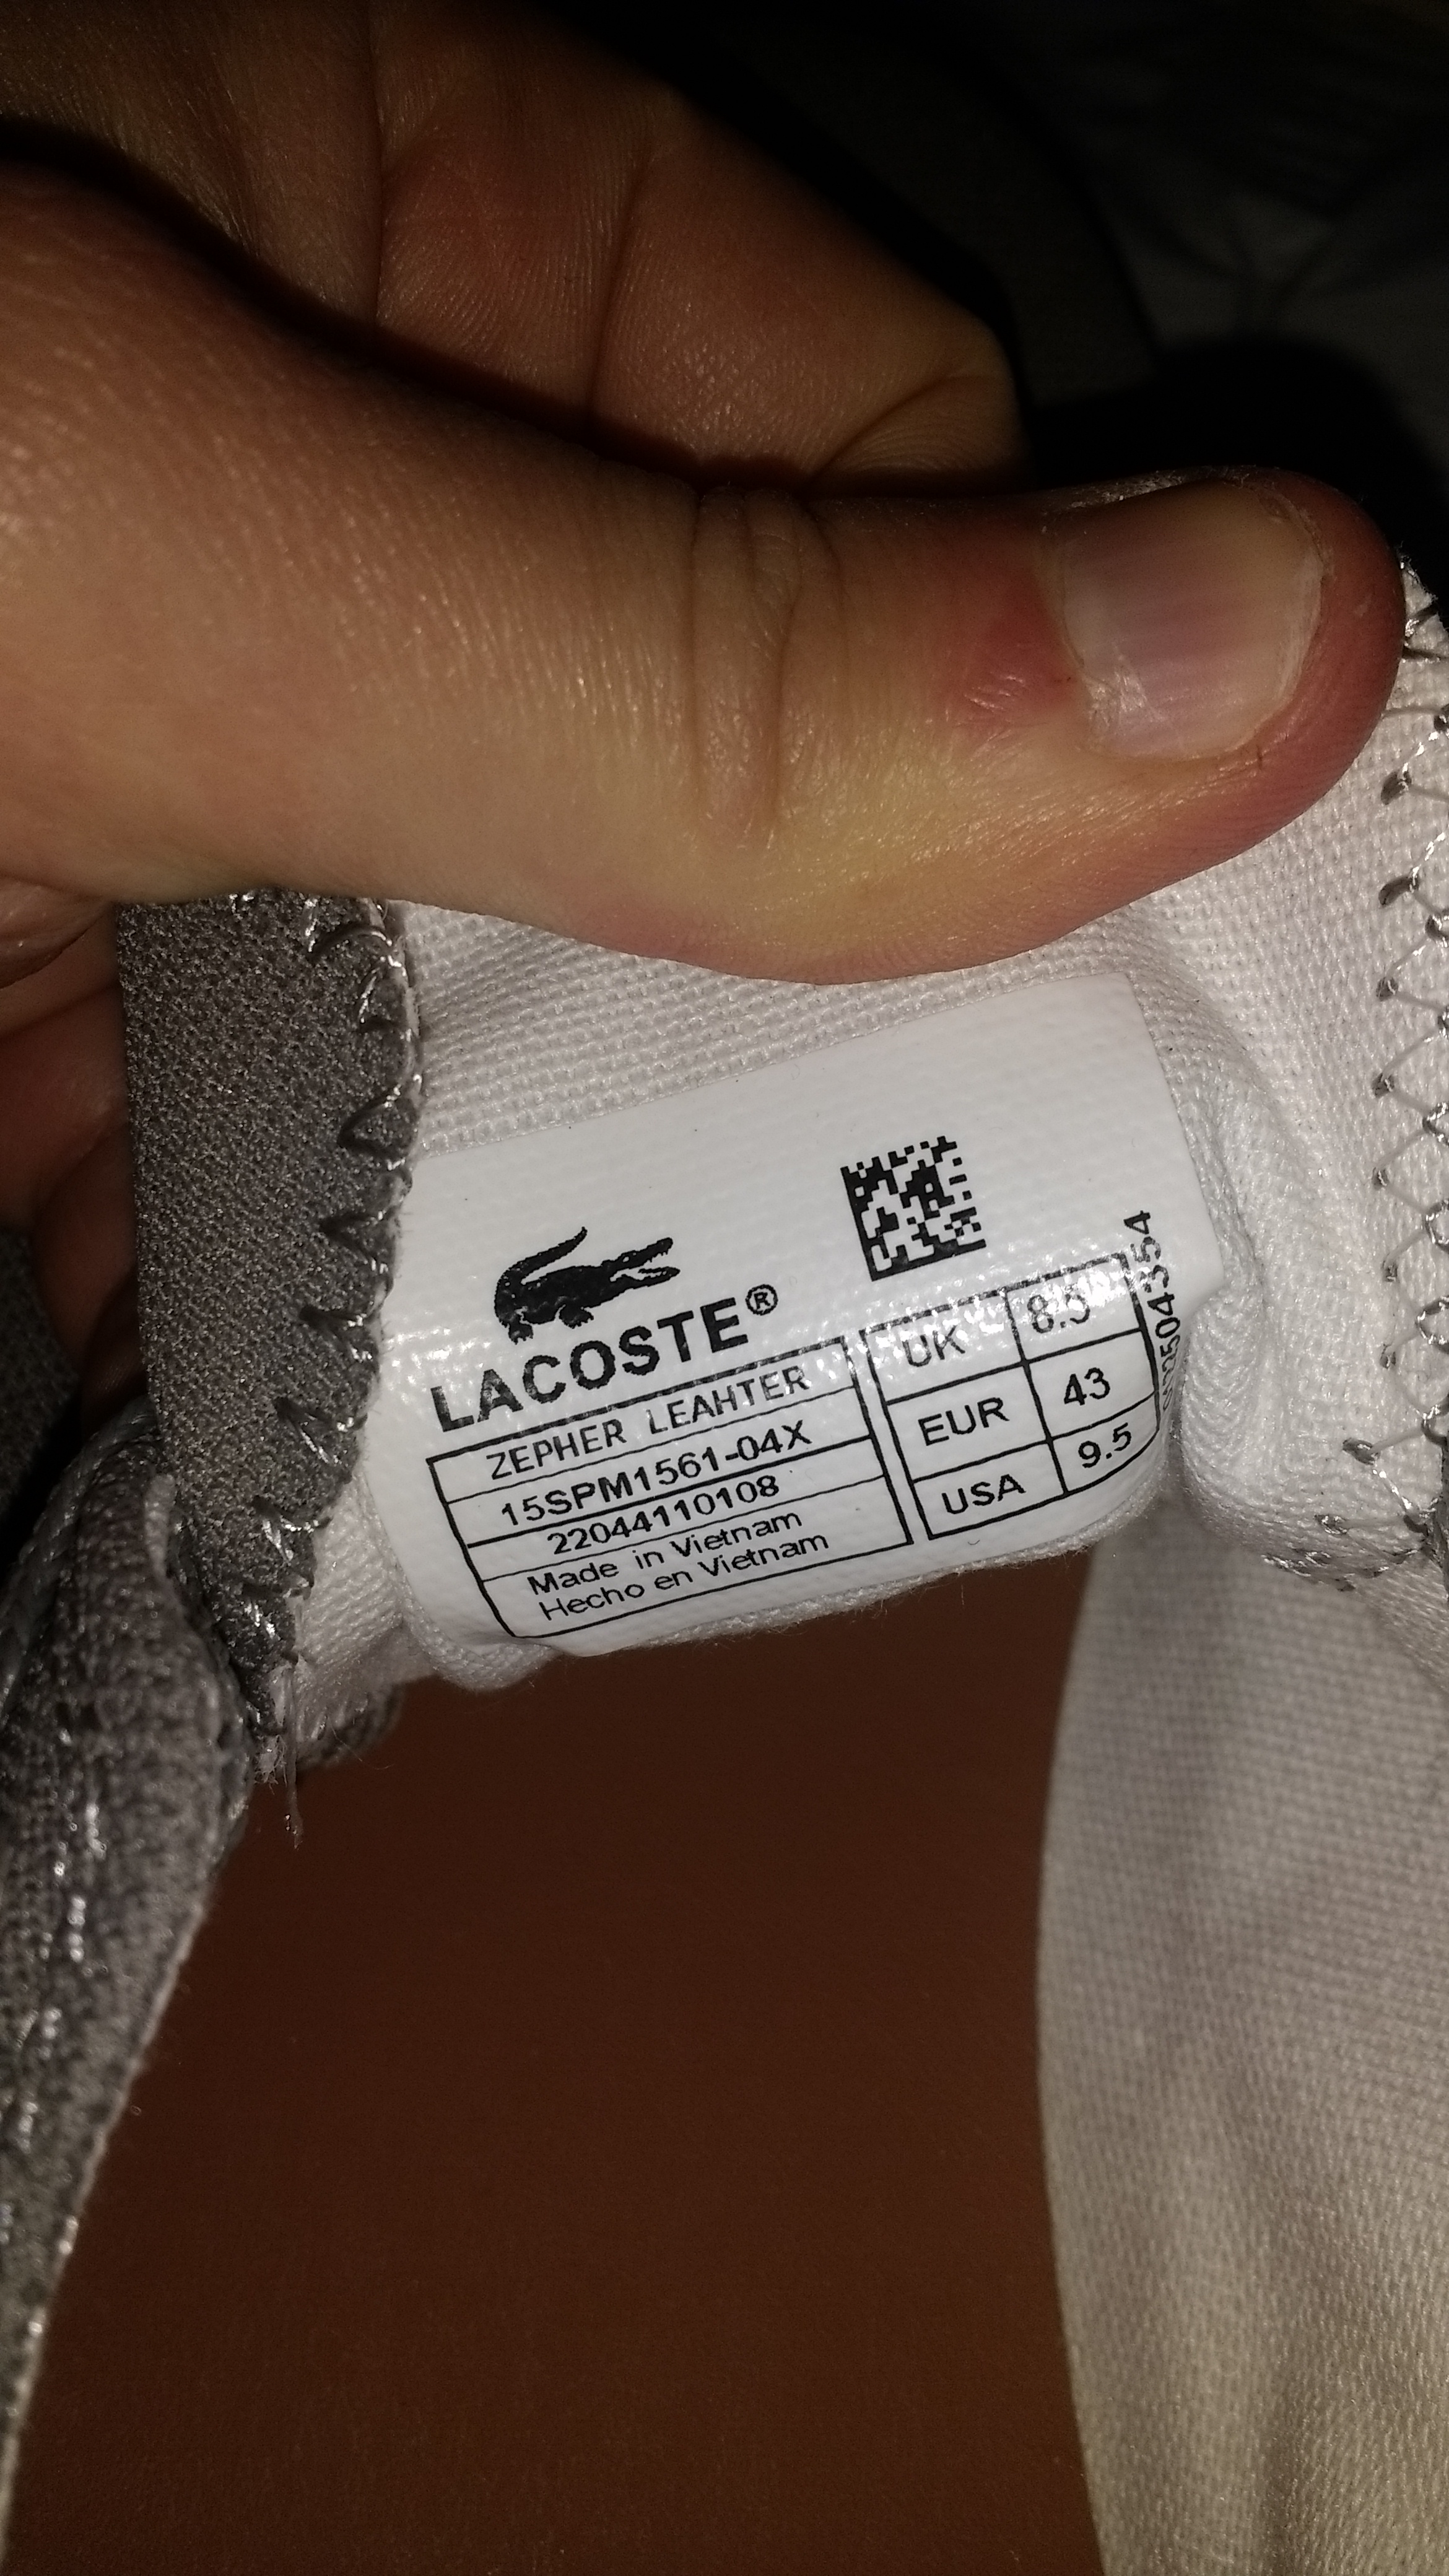 how to tell if lacoste is fake